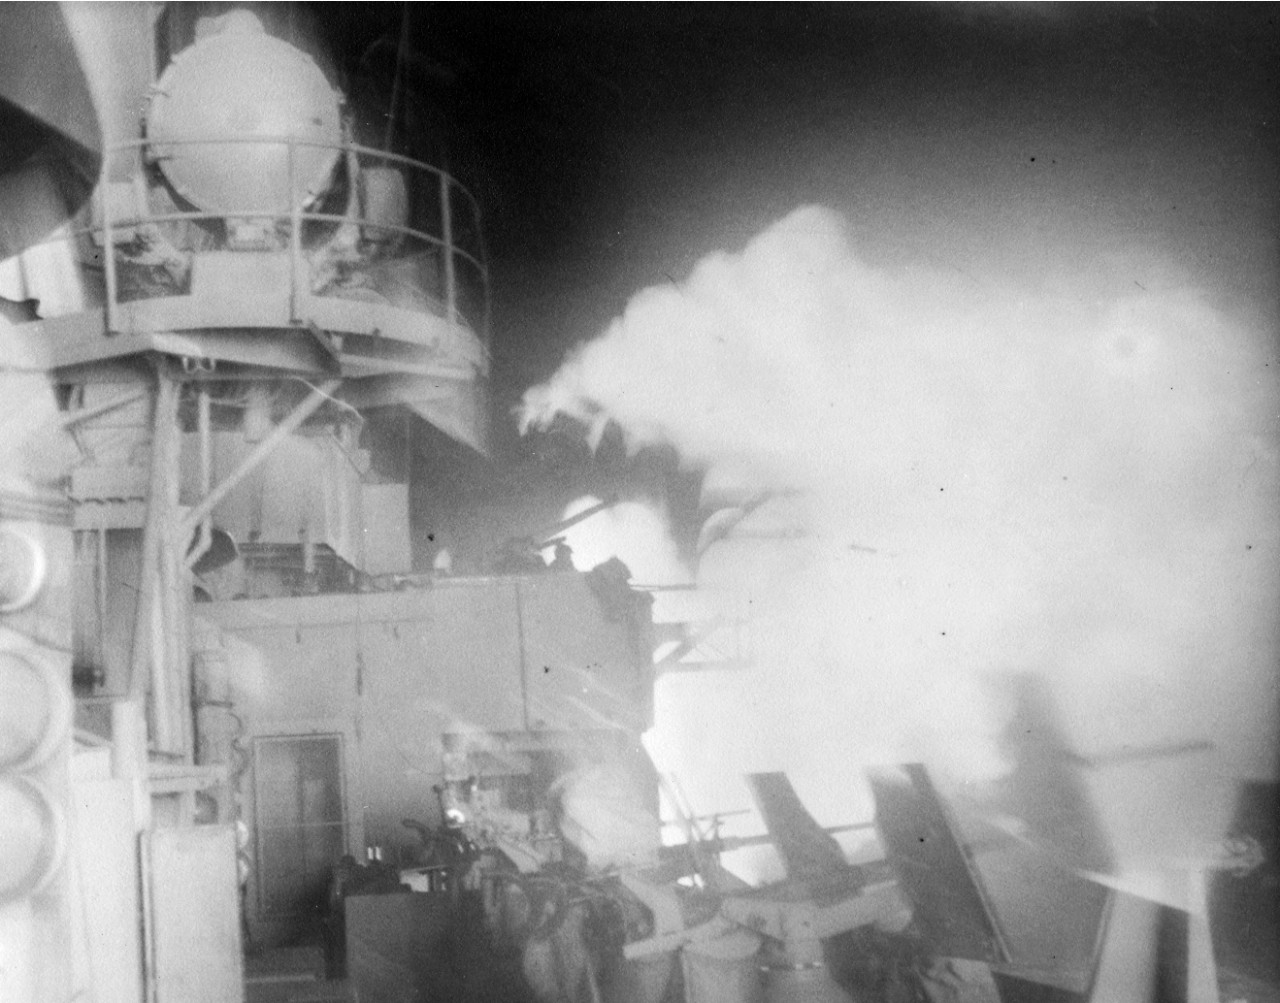 Unidentified ship participating in a night bombardment south of Kiska, July 25, 1943. From the VADM Robert C. Giffen Photo Collection. 